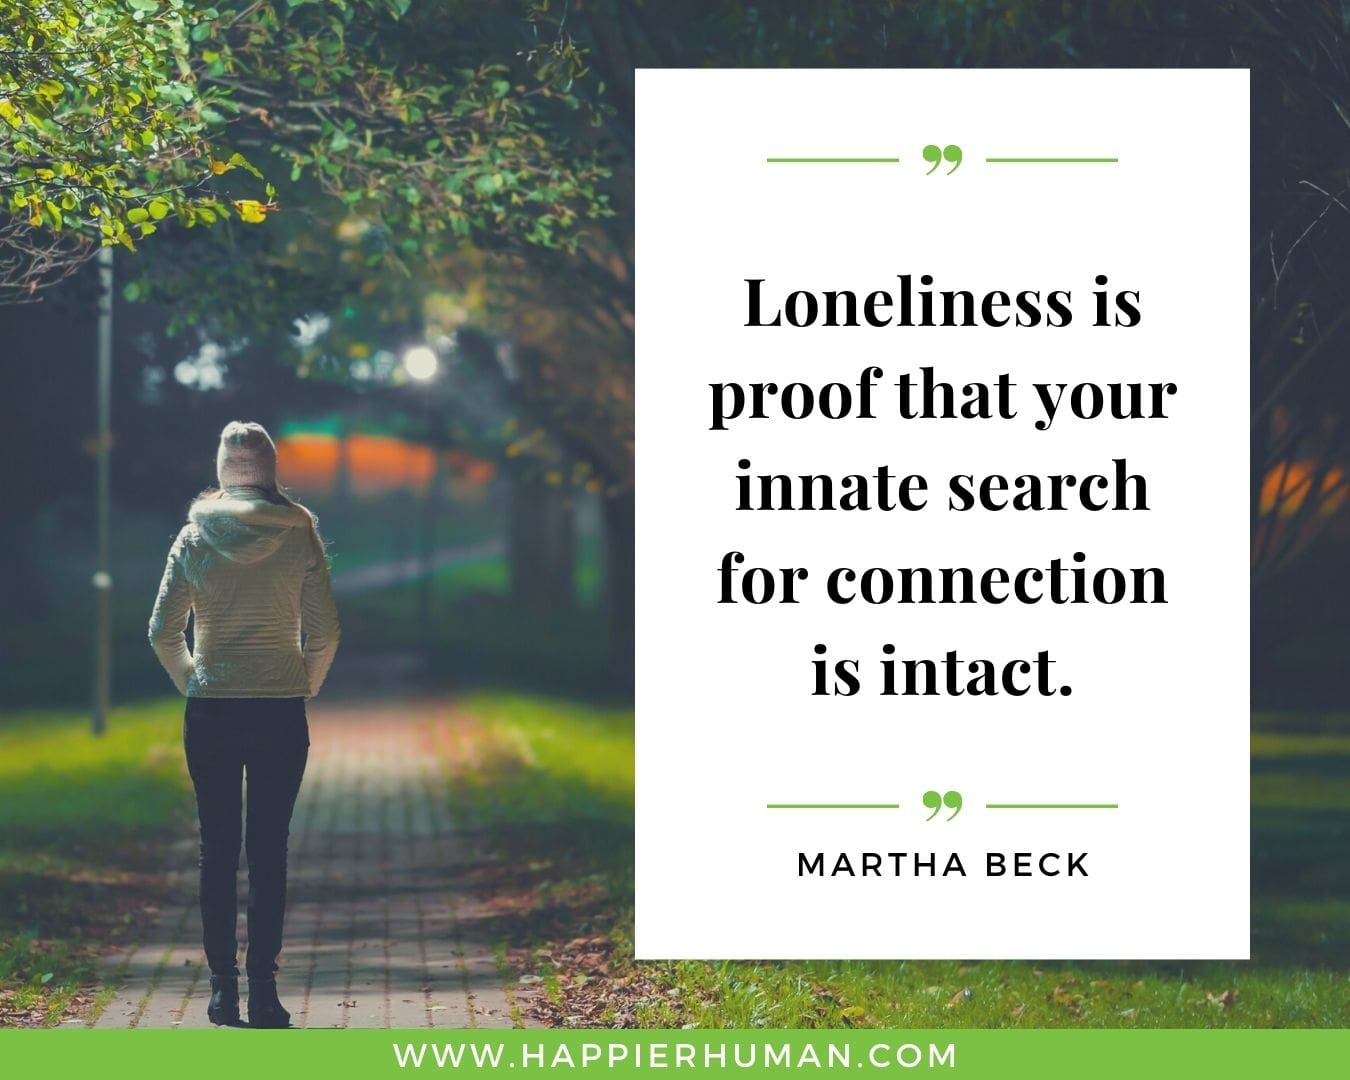 Loneliness Quotes - “Loneliness is proof that your innate search for connection is intact.” – Martha Beck